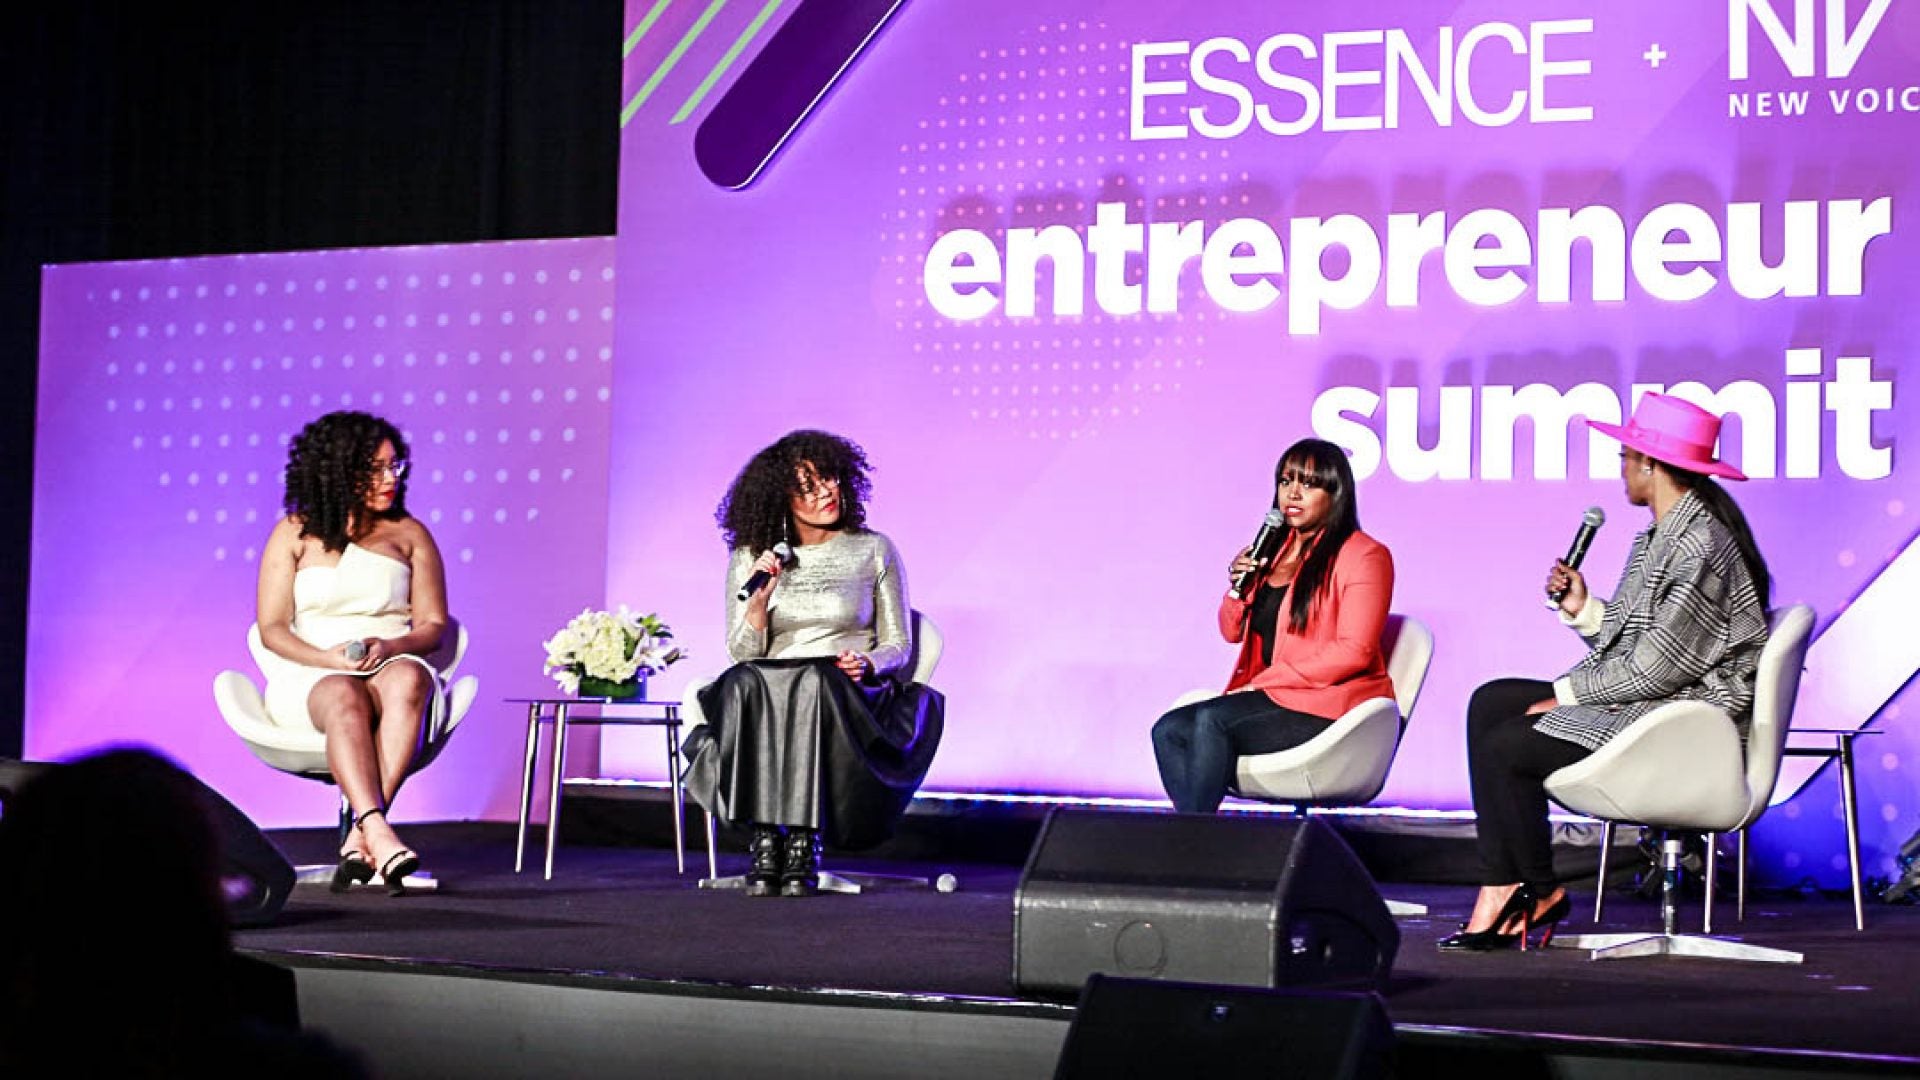 Keshia Knight Pulliam And Arian Simone Challenge More Black Women To Become Investors In Start Ups: 'Join Us!'